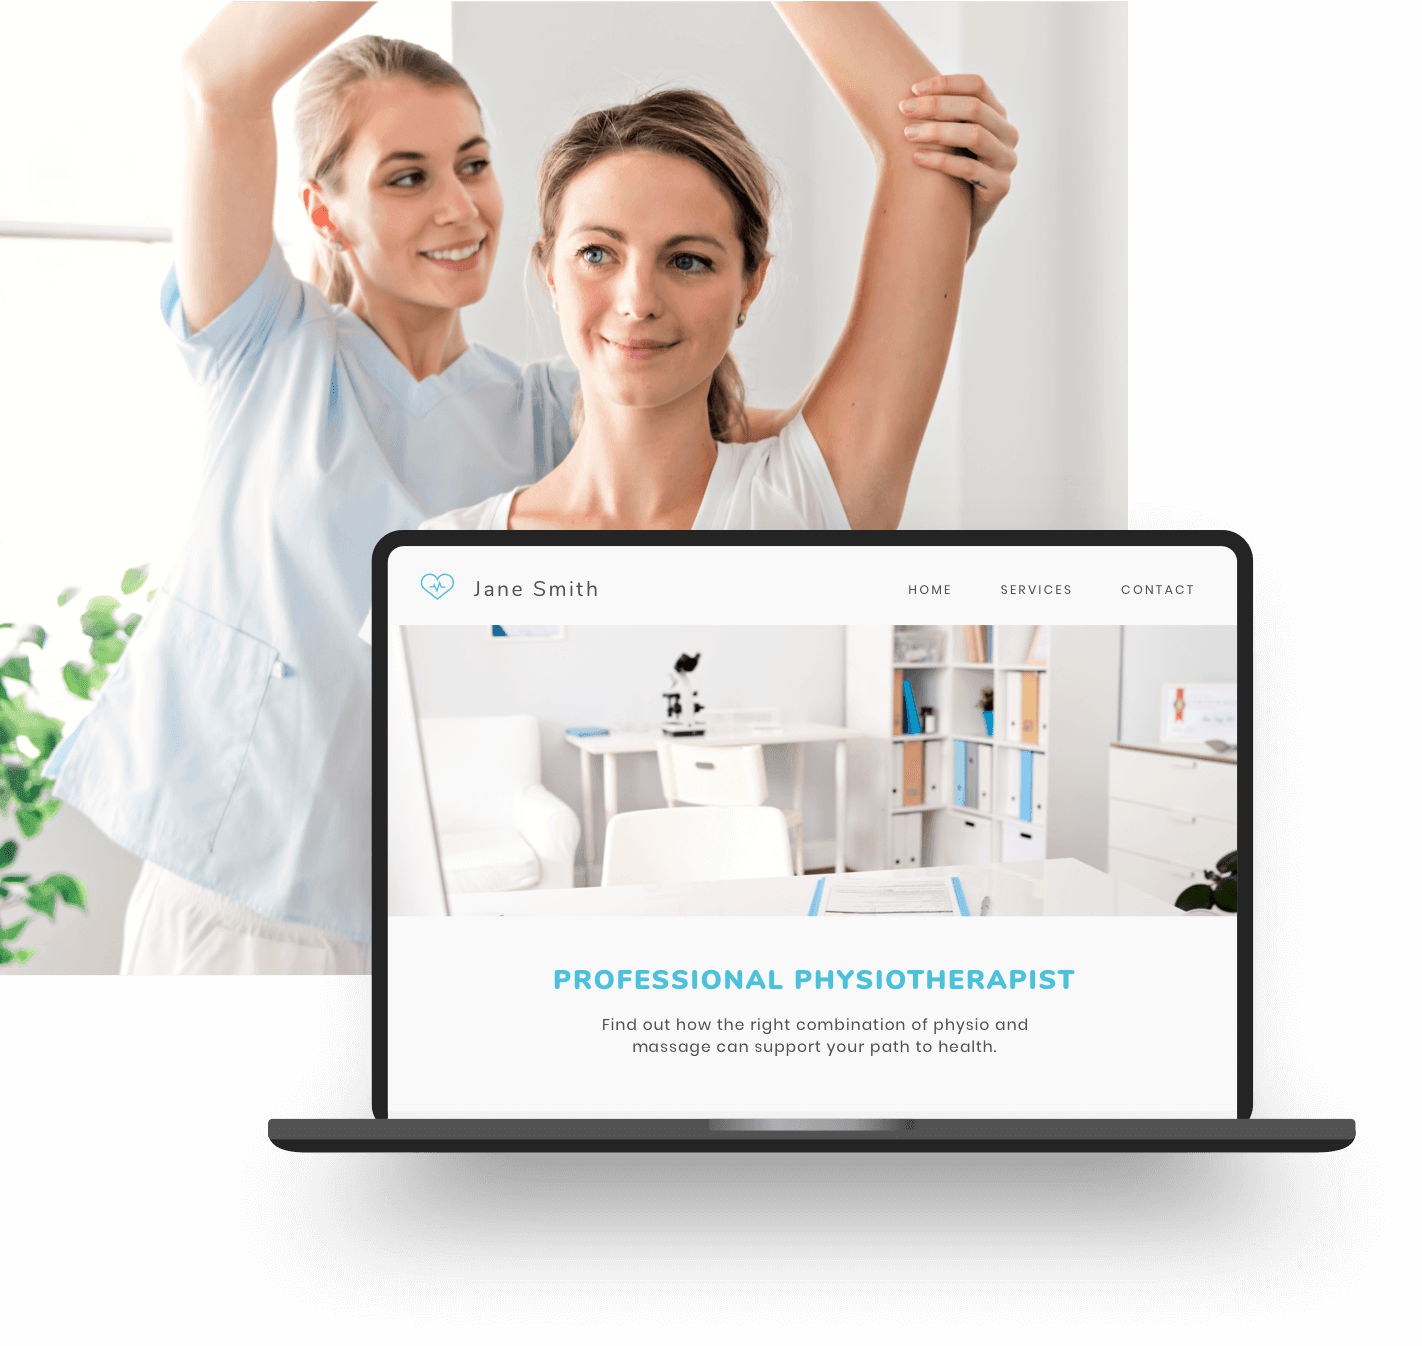 Example of a physiotherapist website built with Jimdo